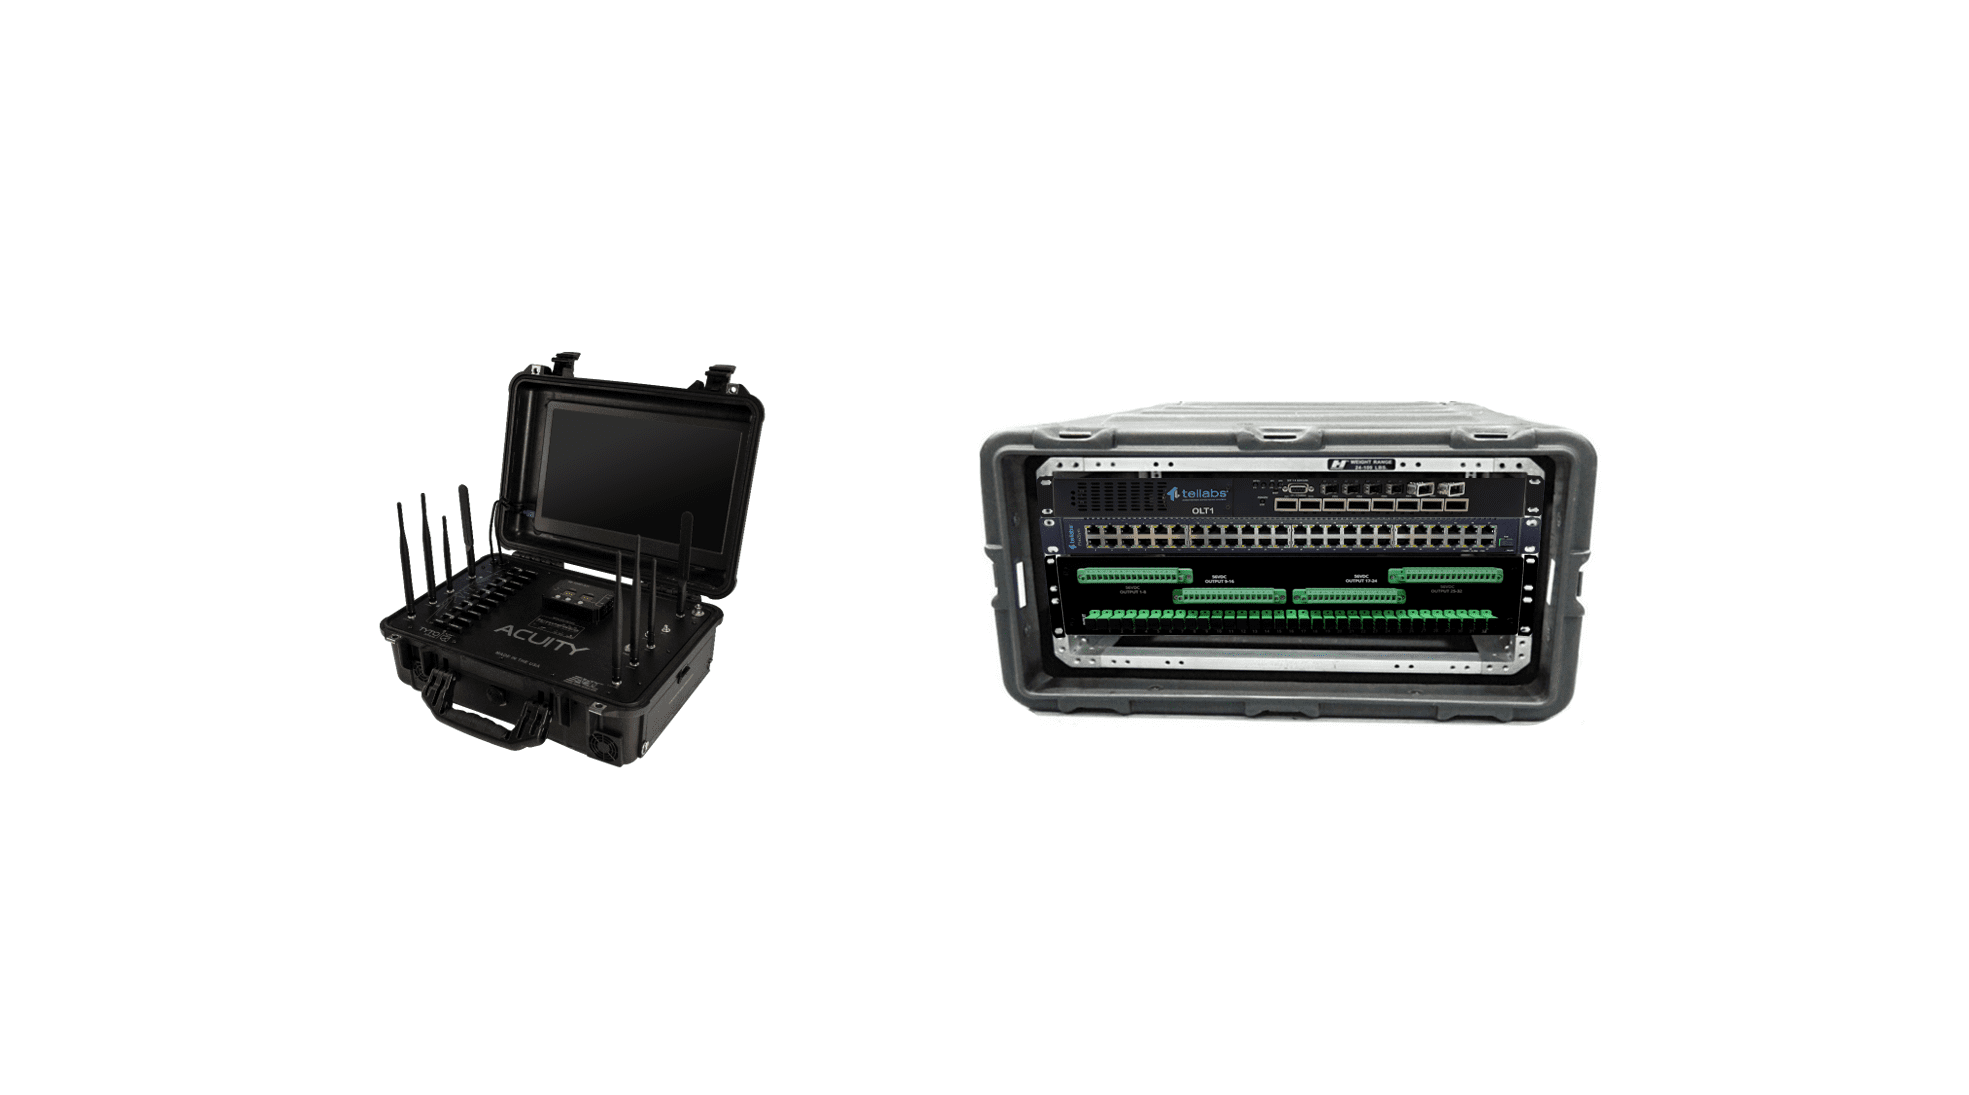 ACUITY LAN solution with mini data center and Optical LAN combined